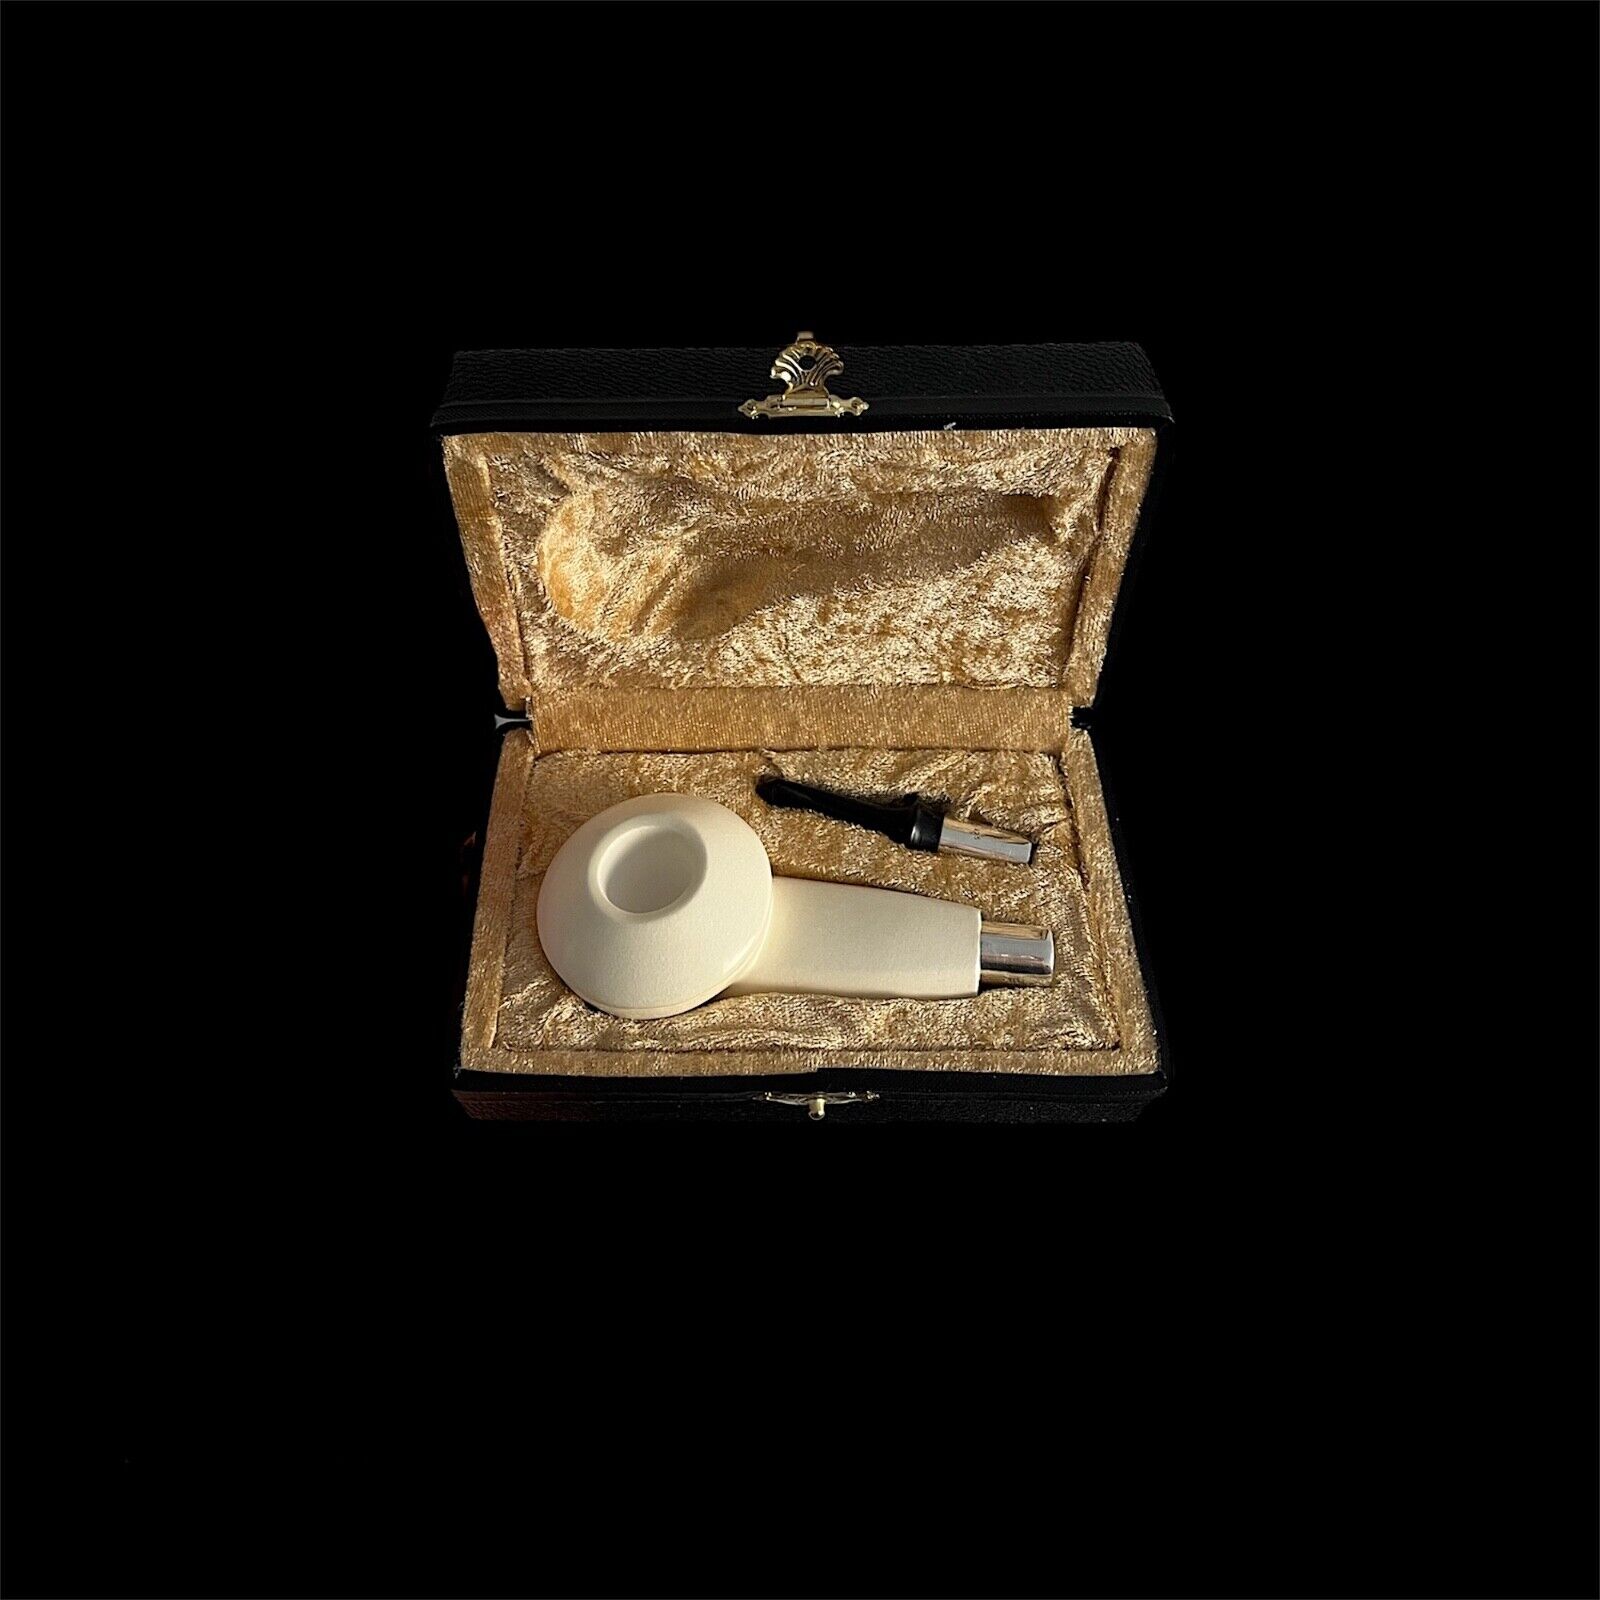 Large Classic Block Meerschaum Pipe 925 silver handmade w fitted case MD-249